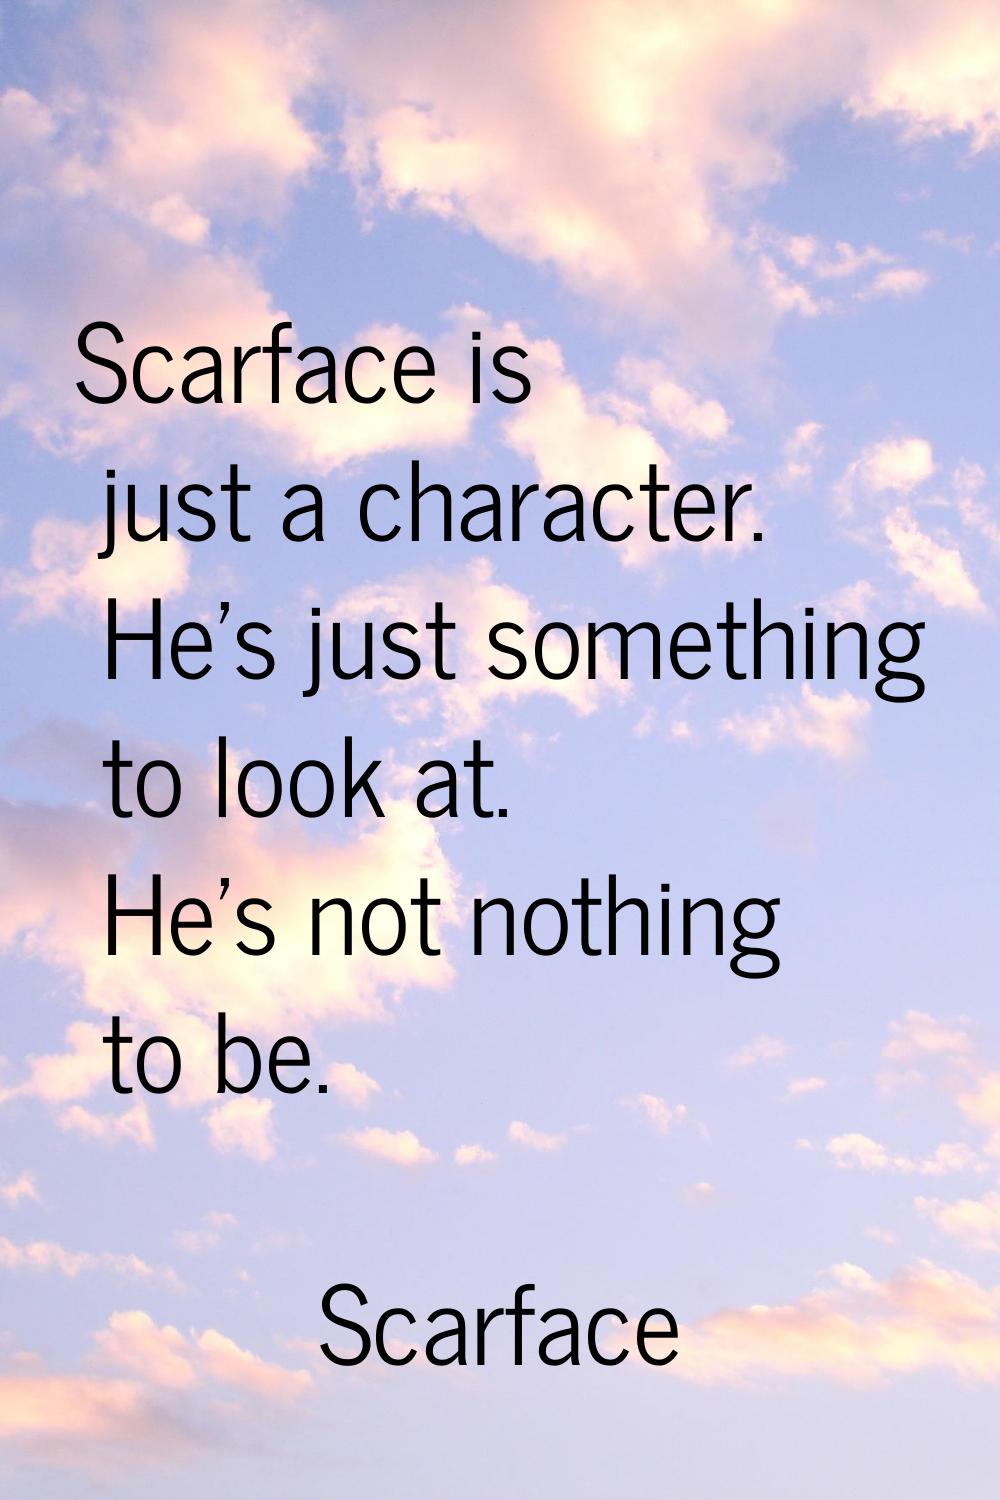 Scarface is just a character. He's just something to look at. He's not nothing to be.